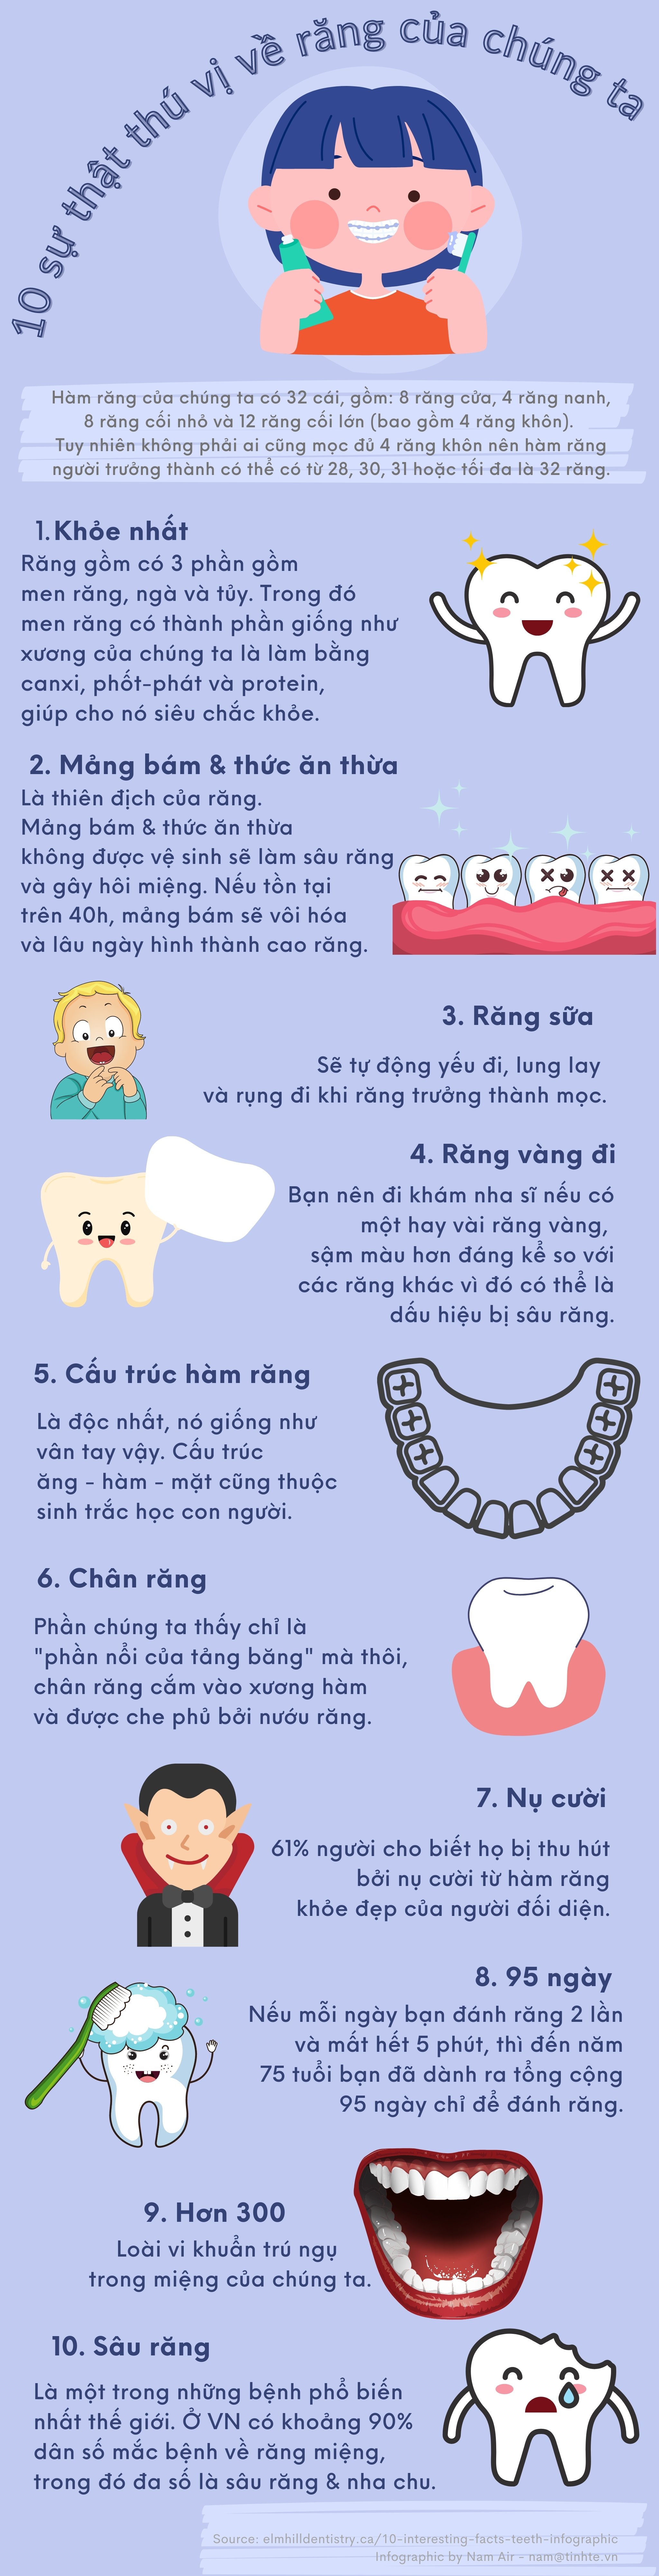 Tinhte-infographic-10-facts-ve-rang.jpg